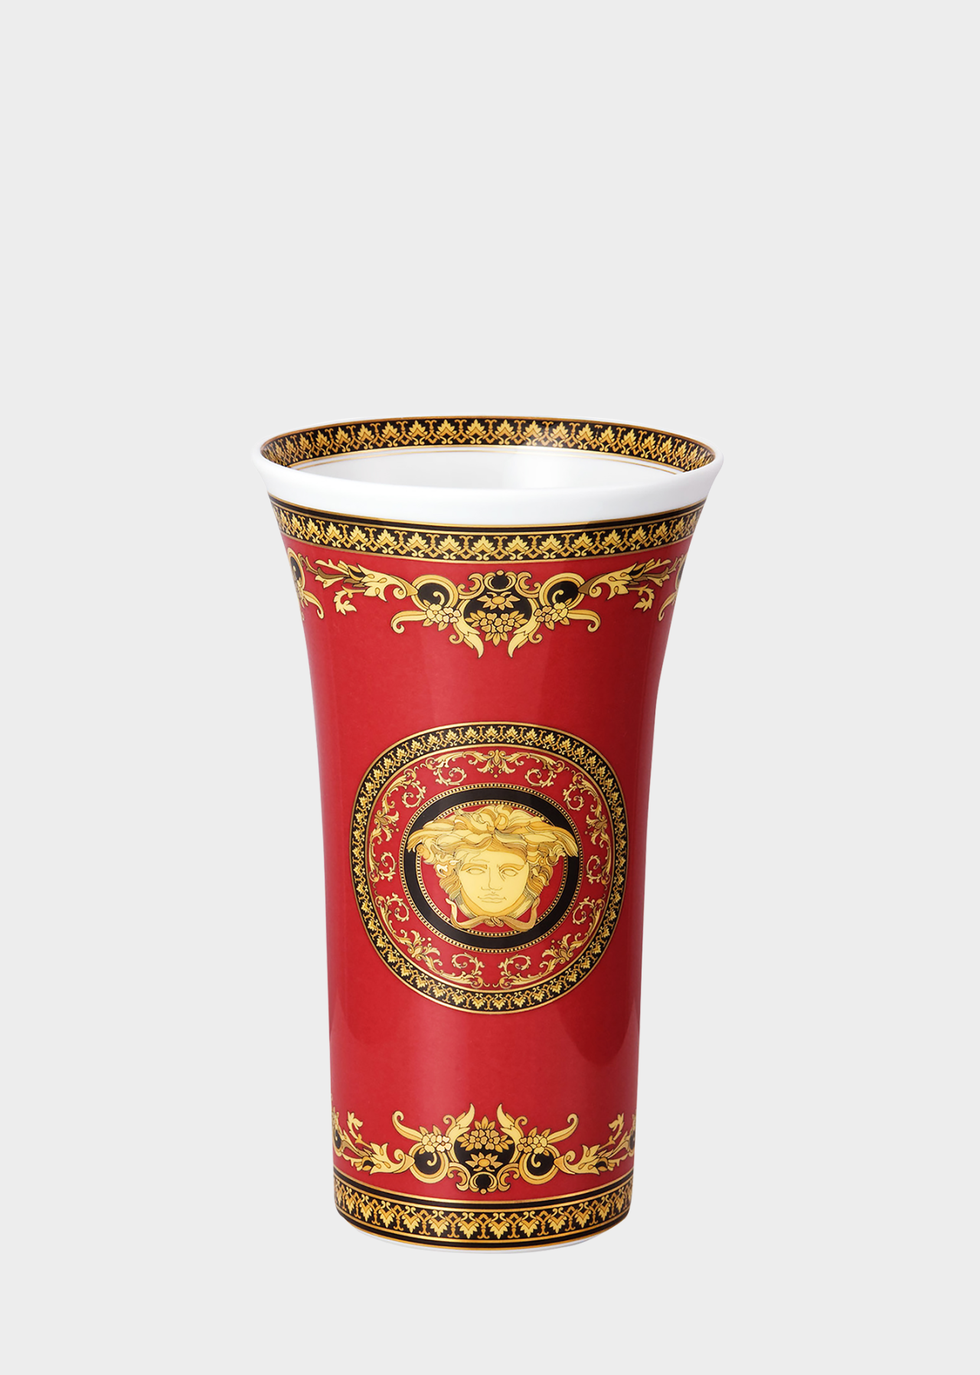 <p><a href="http://www.versace.com/eu/en/gifts/home-decor-gifts/medusa-vase-26-cm-n1409/N26026-N102721_N1409.html?cgid=540000#start=1" target="_blank" data-tracking-id="recirc-text-link">Versace</a>, €<span class="redactor-invisible-space" data-verified="redactor" data-redactor-tag="span" data-redactor-class="redactor-invisible-space">&nbsp;</span>370</p>